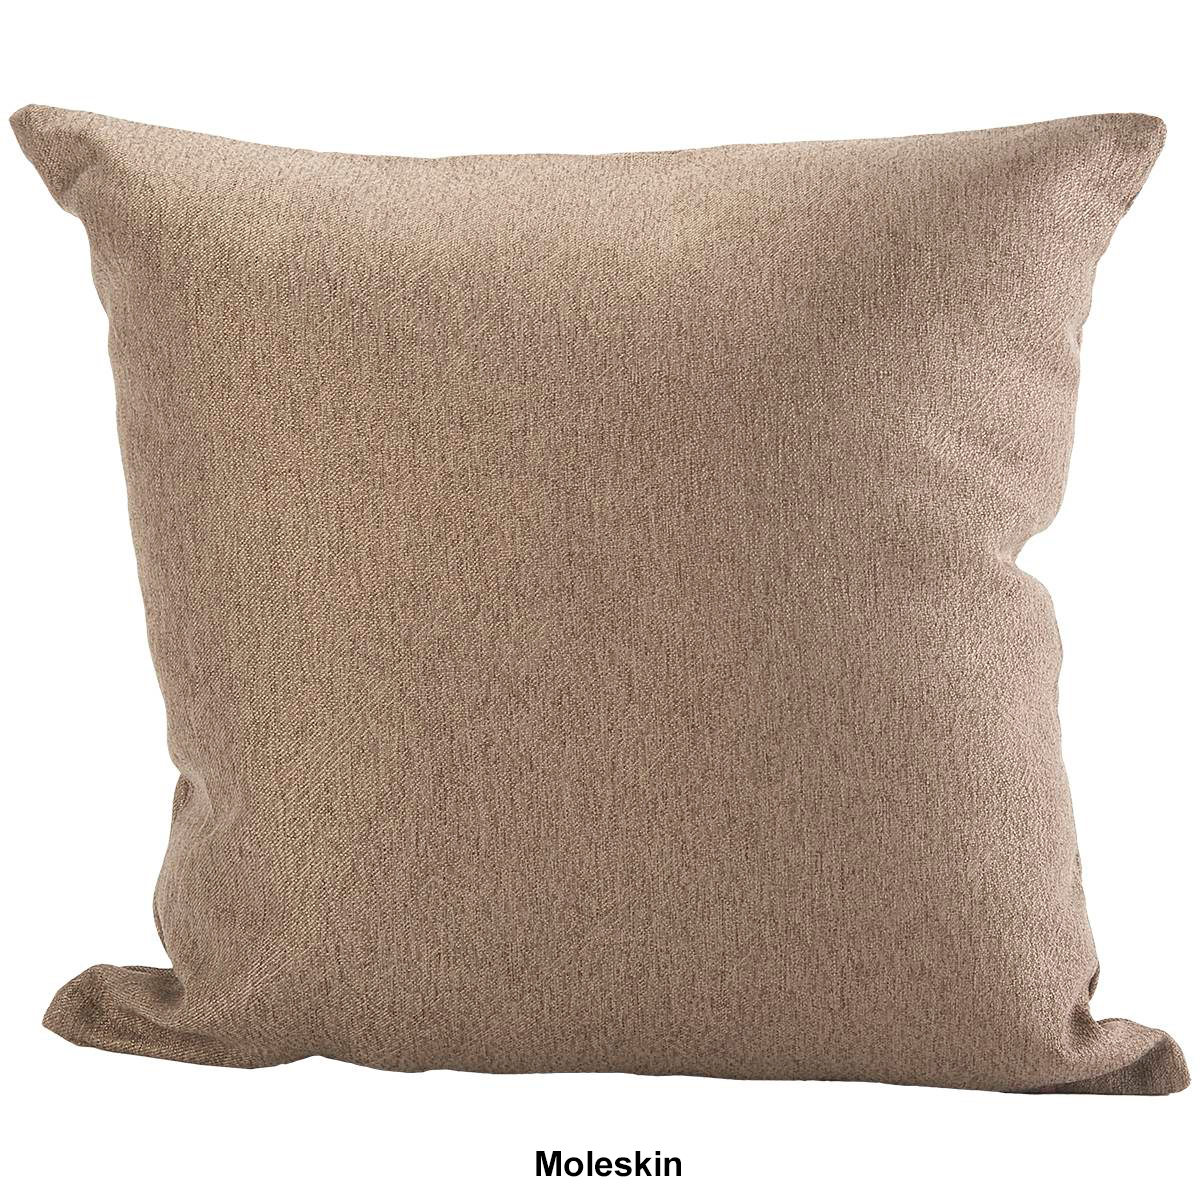 Shaker Solid Decorative Pillow - 18x18